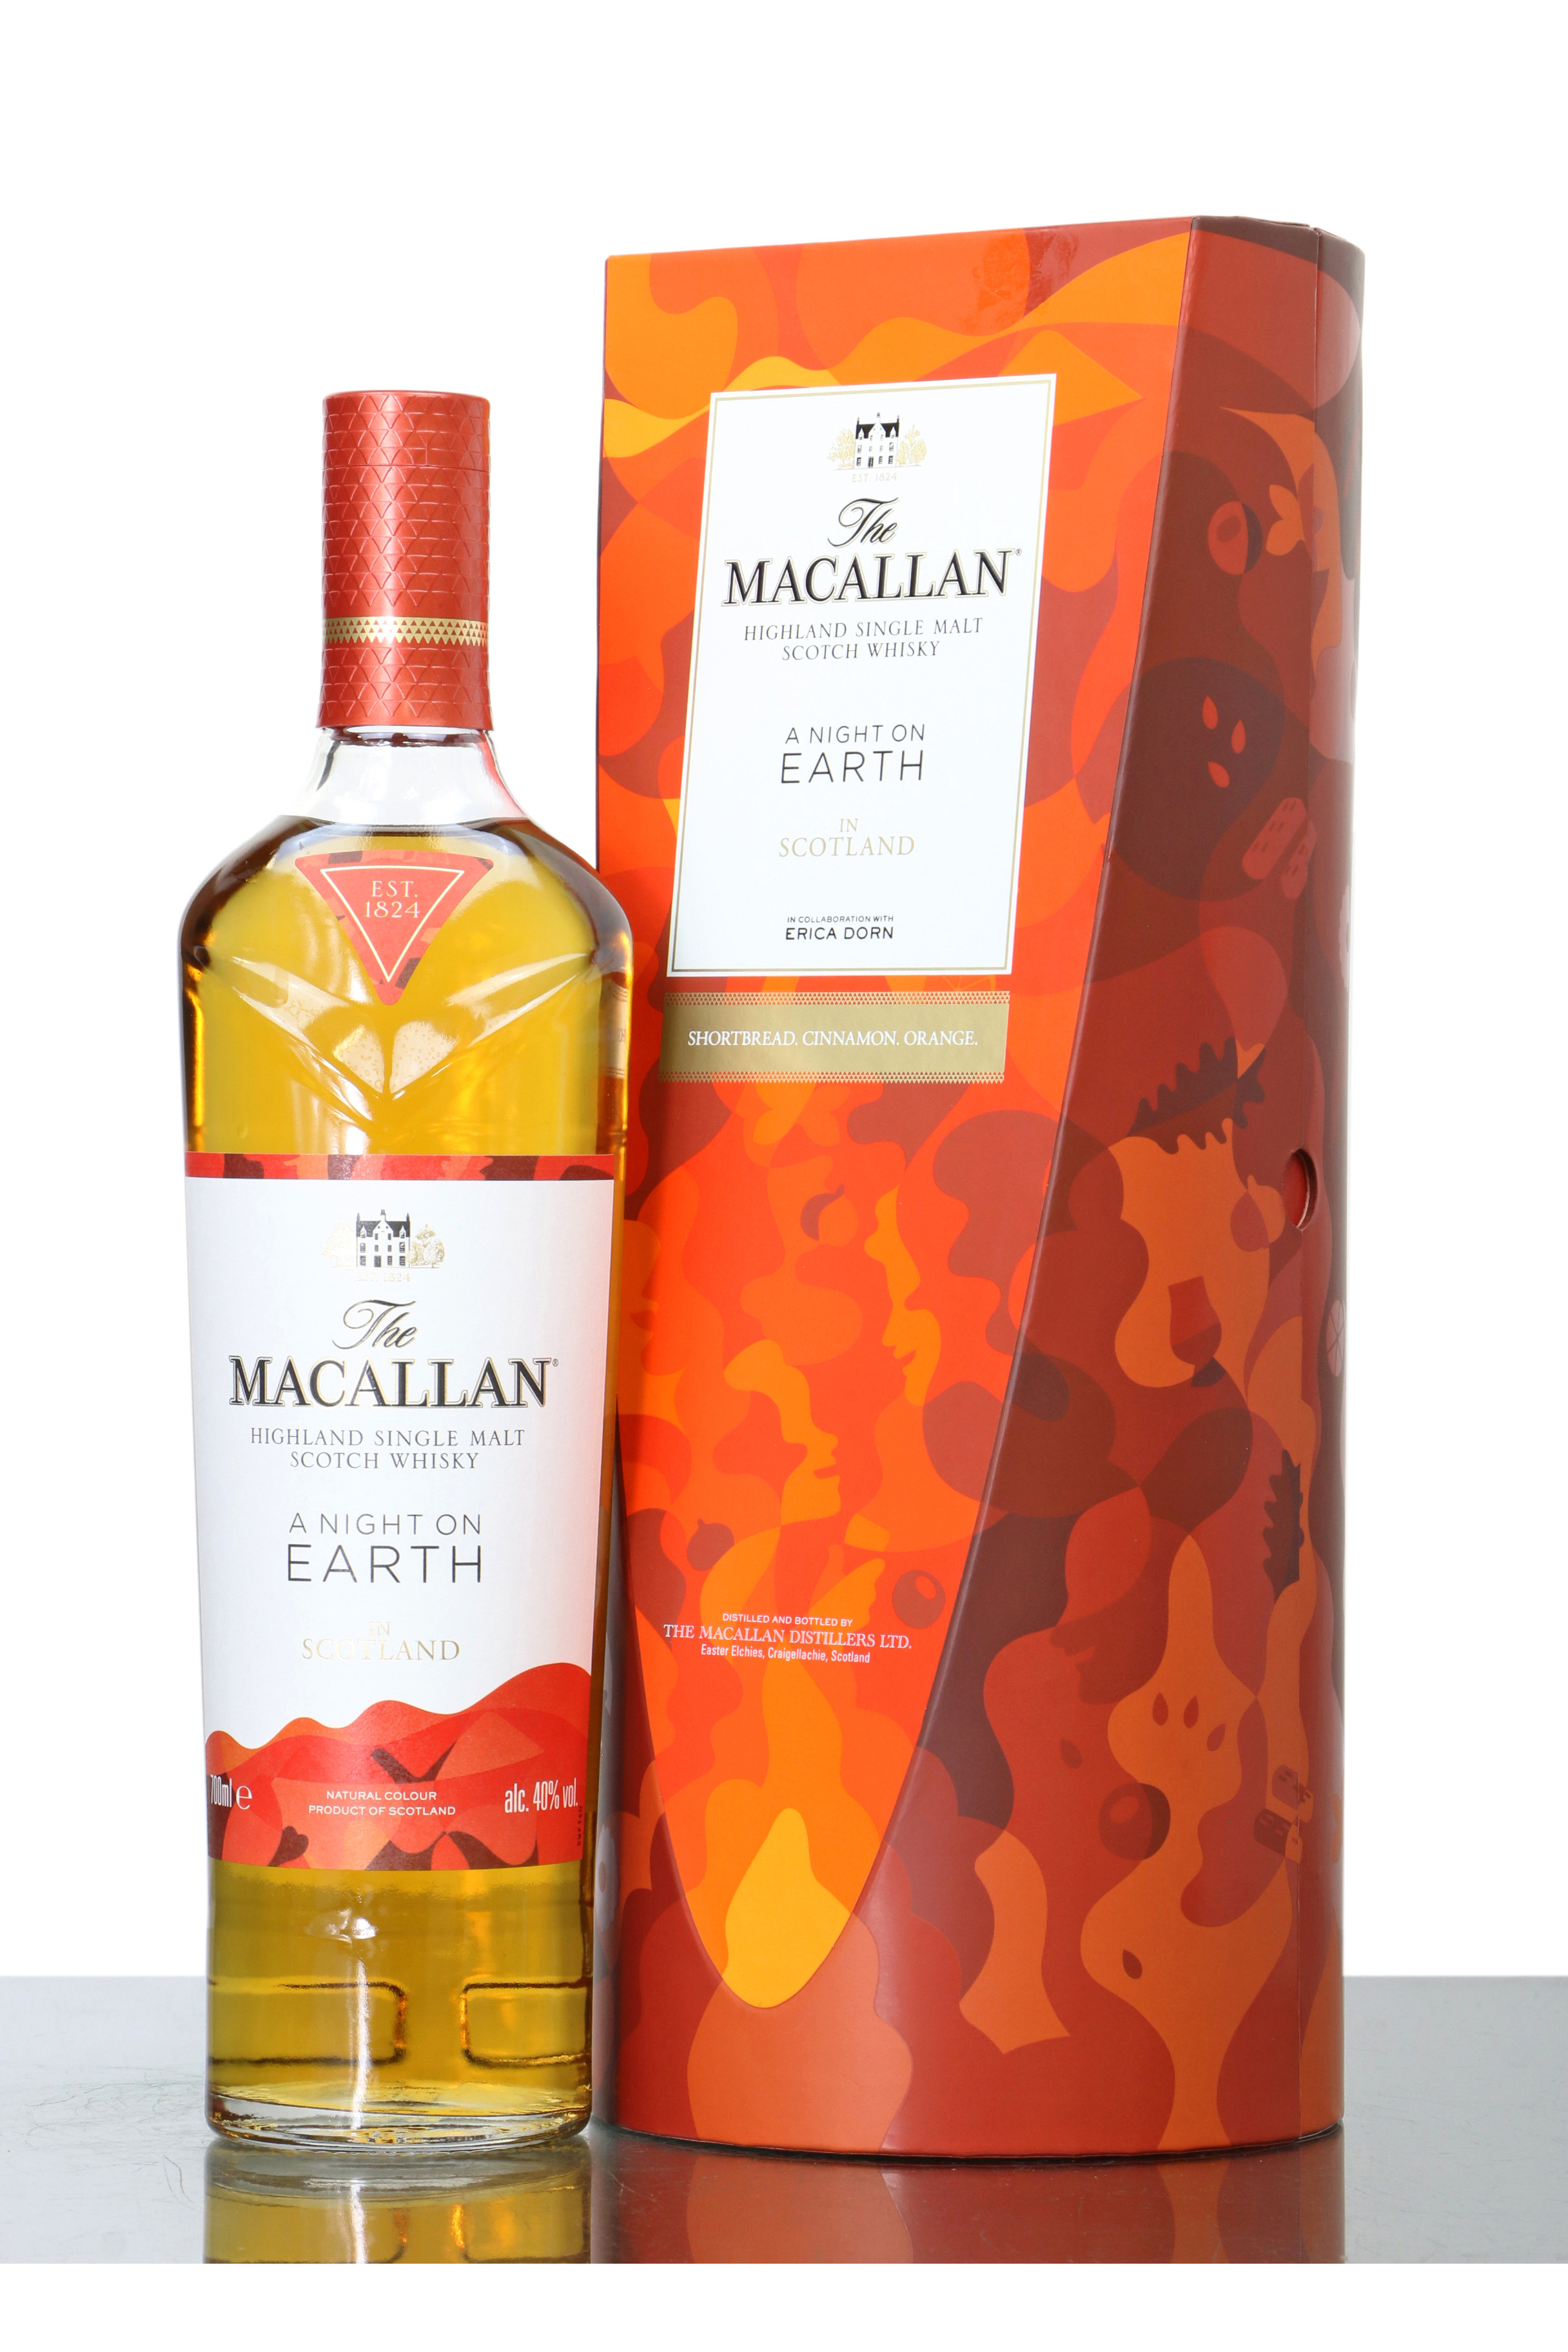 Macallan A Night On Earth In Scotland Just Whisky Auctions